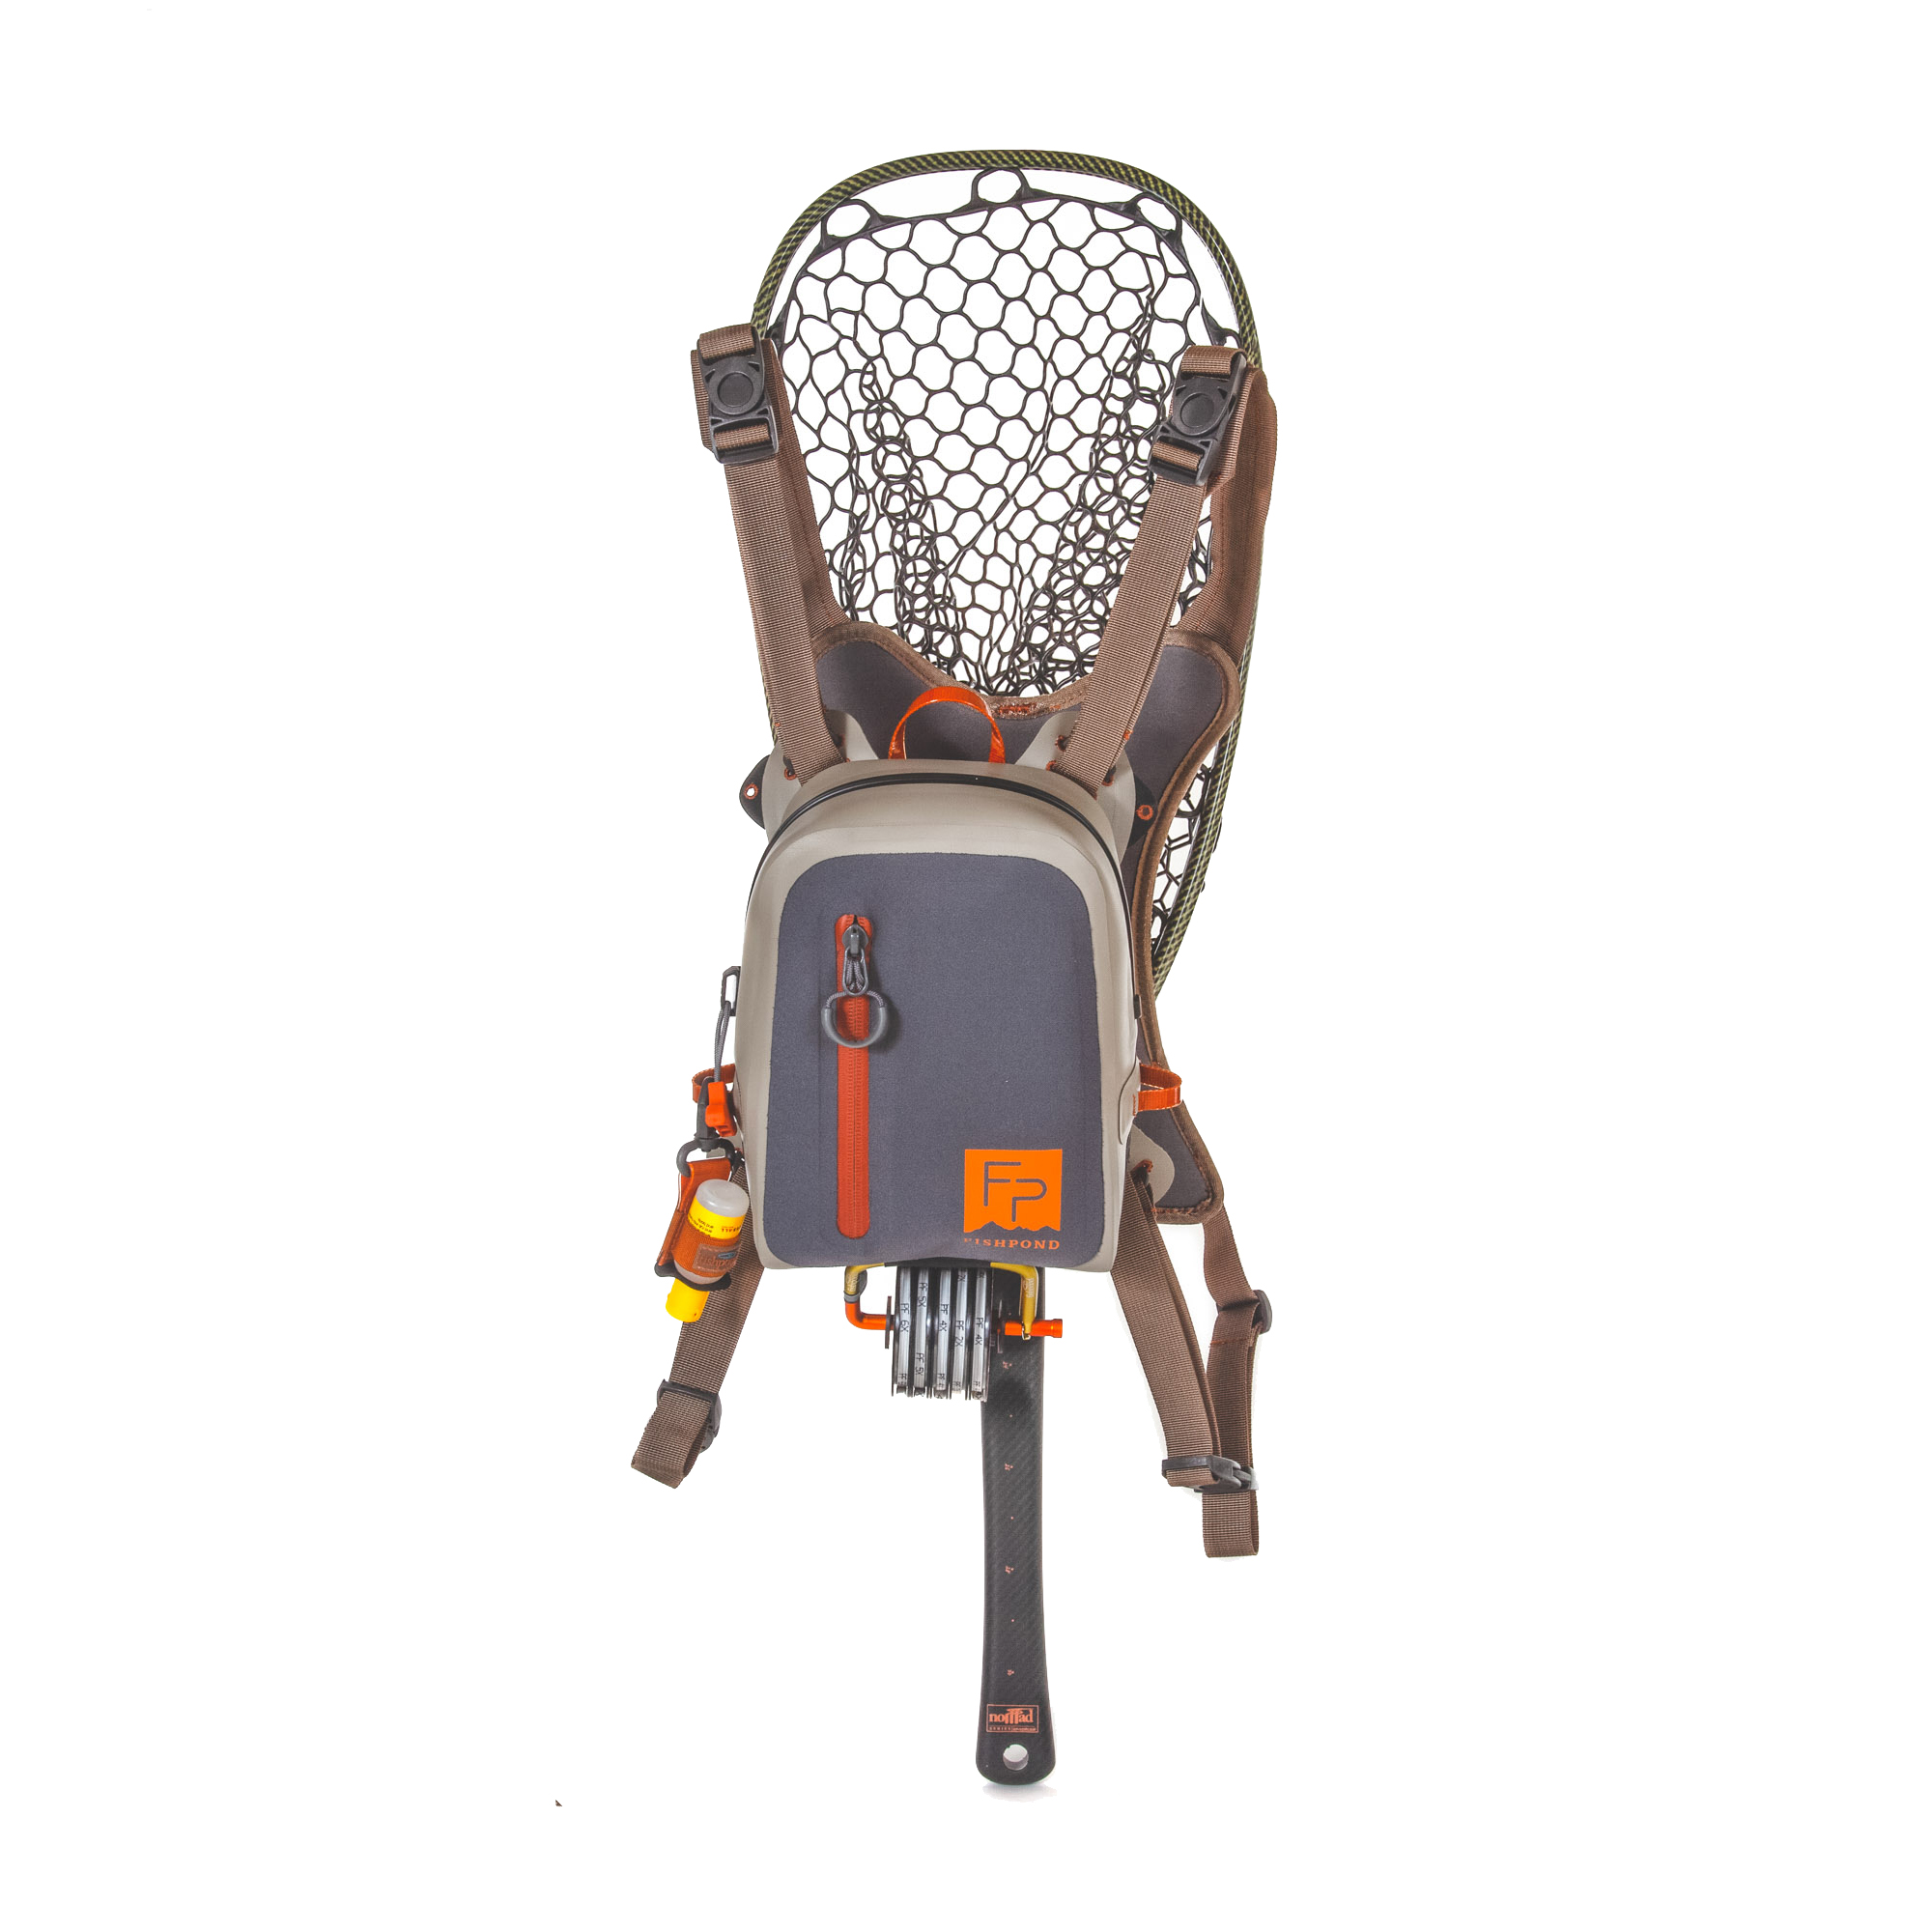 Fishpond Thunderhead Chest Pack – Guide Flyfishing, Fly Fishing Rods,  Reels, Sage, Redington, RIO